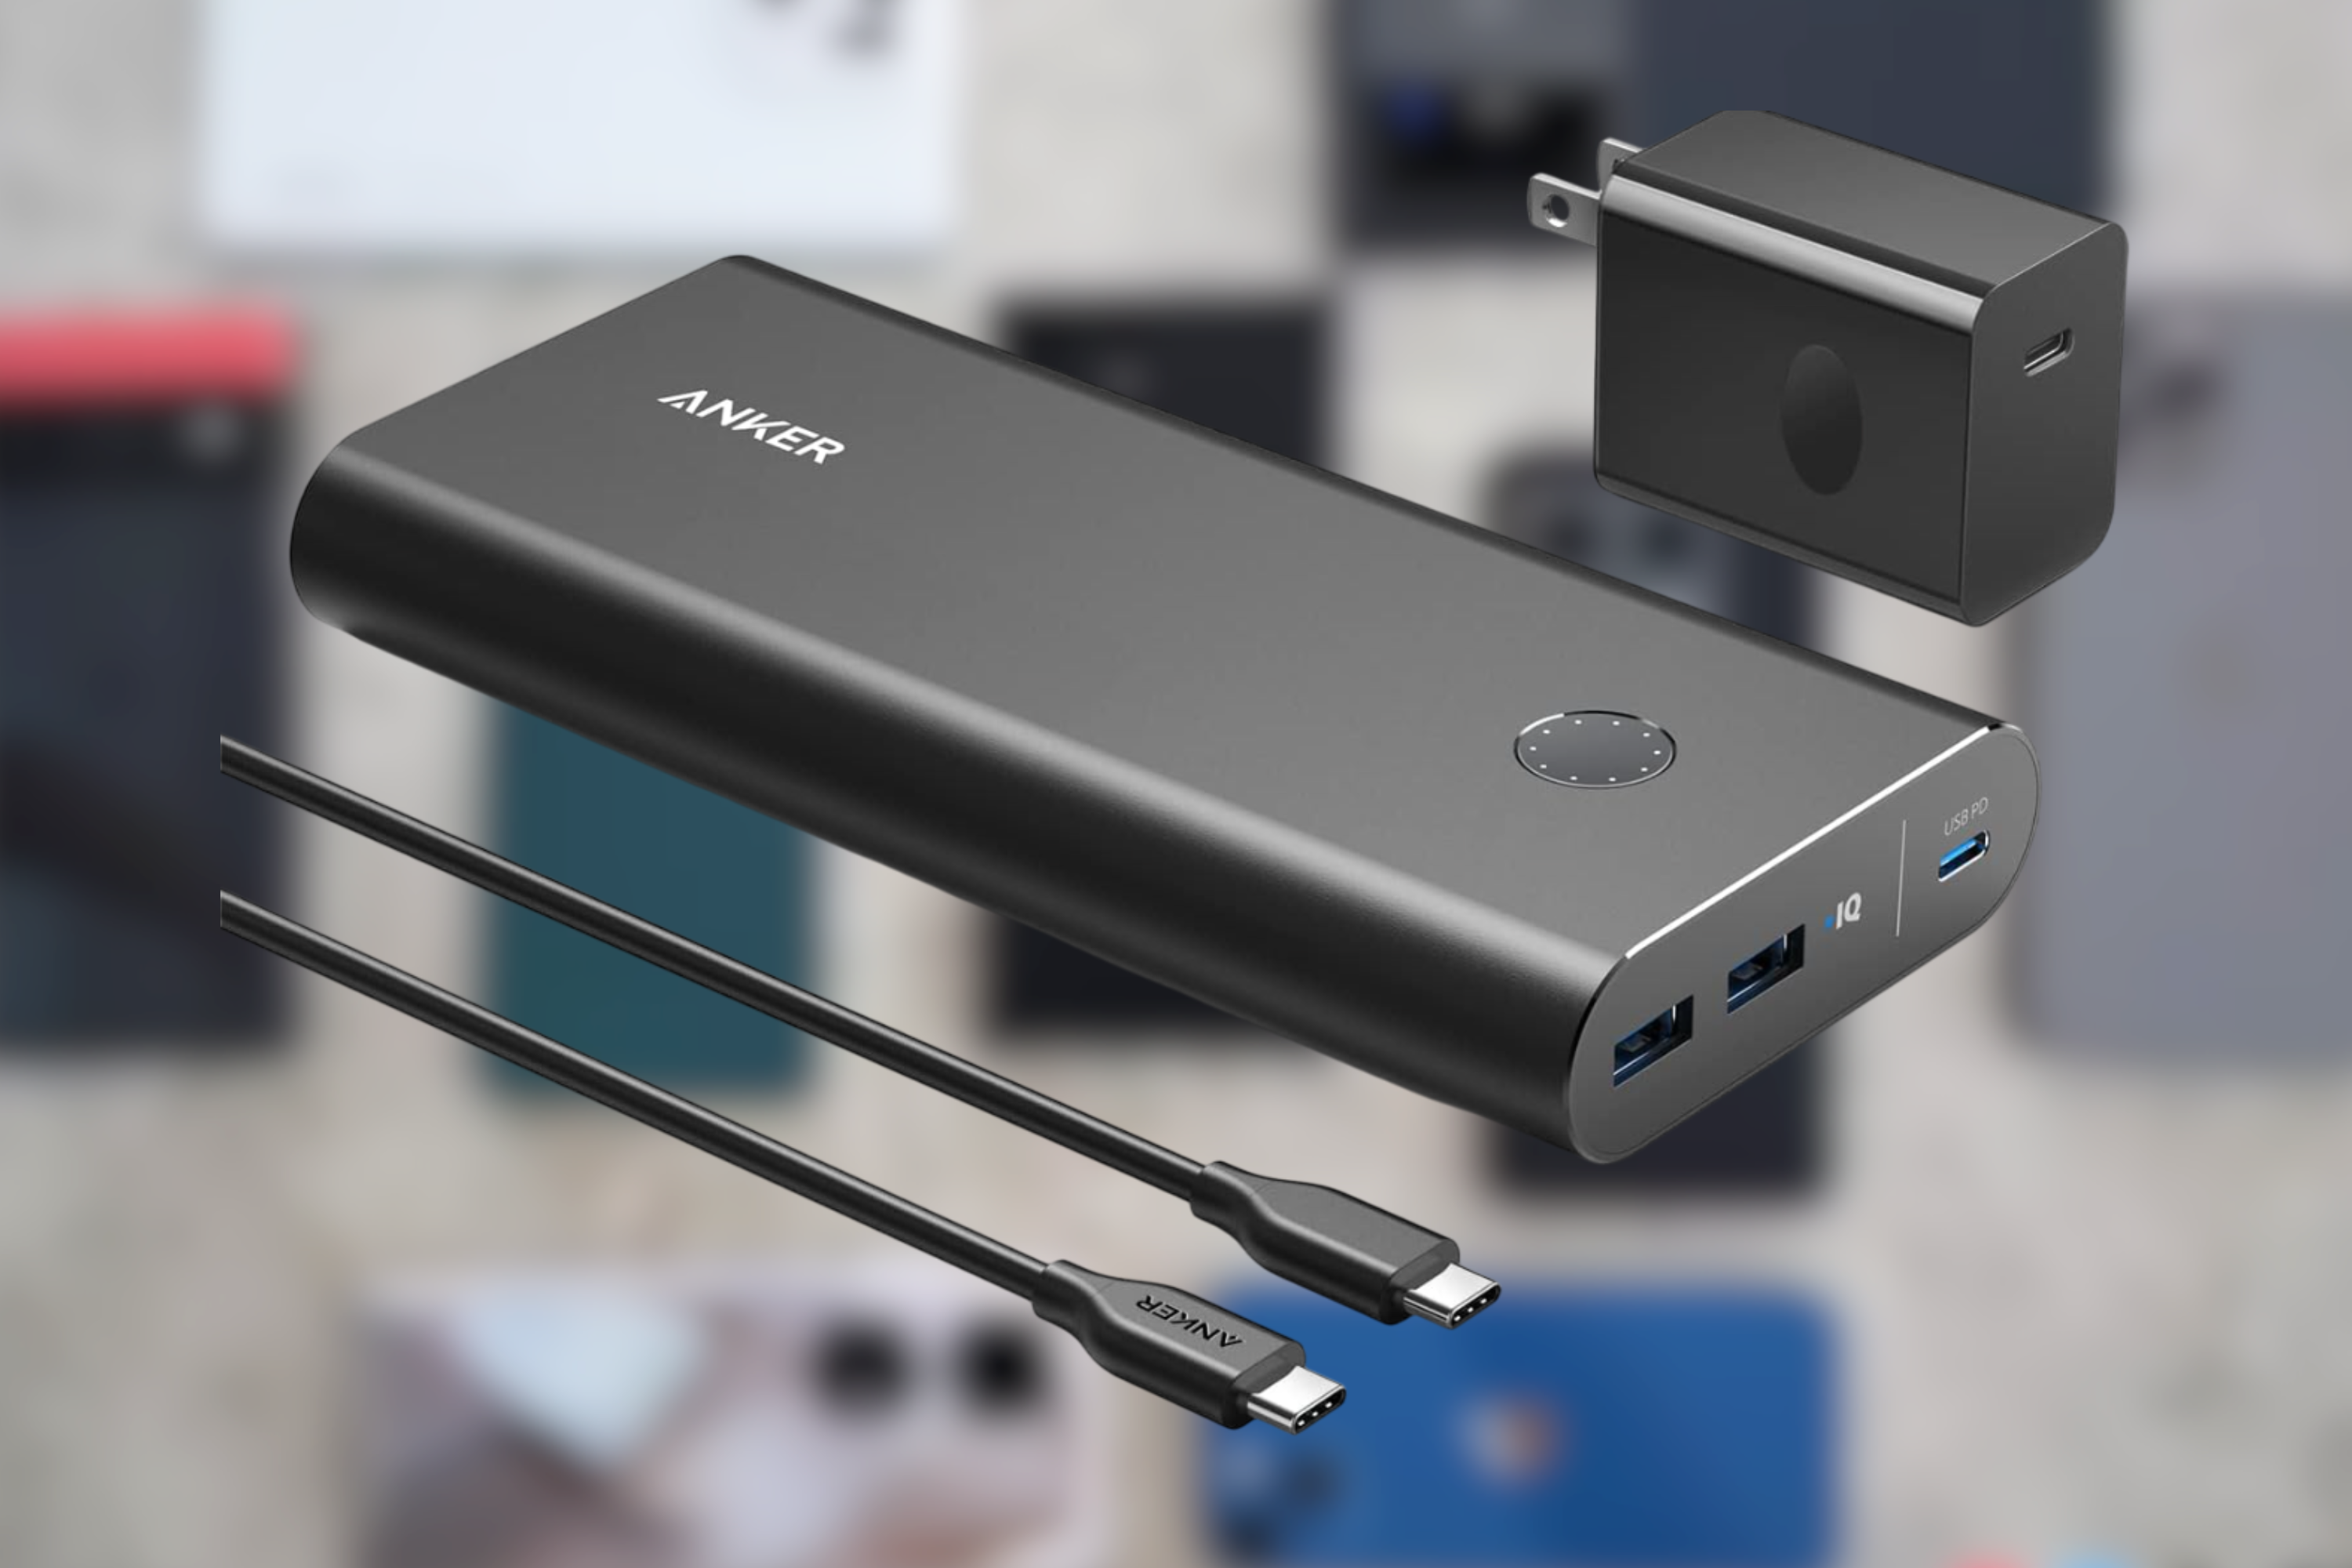 Anker PowerCore bundle with blurred phones in background